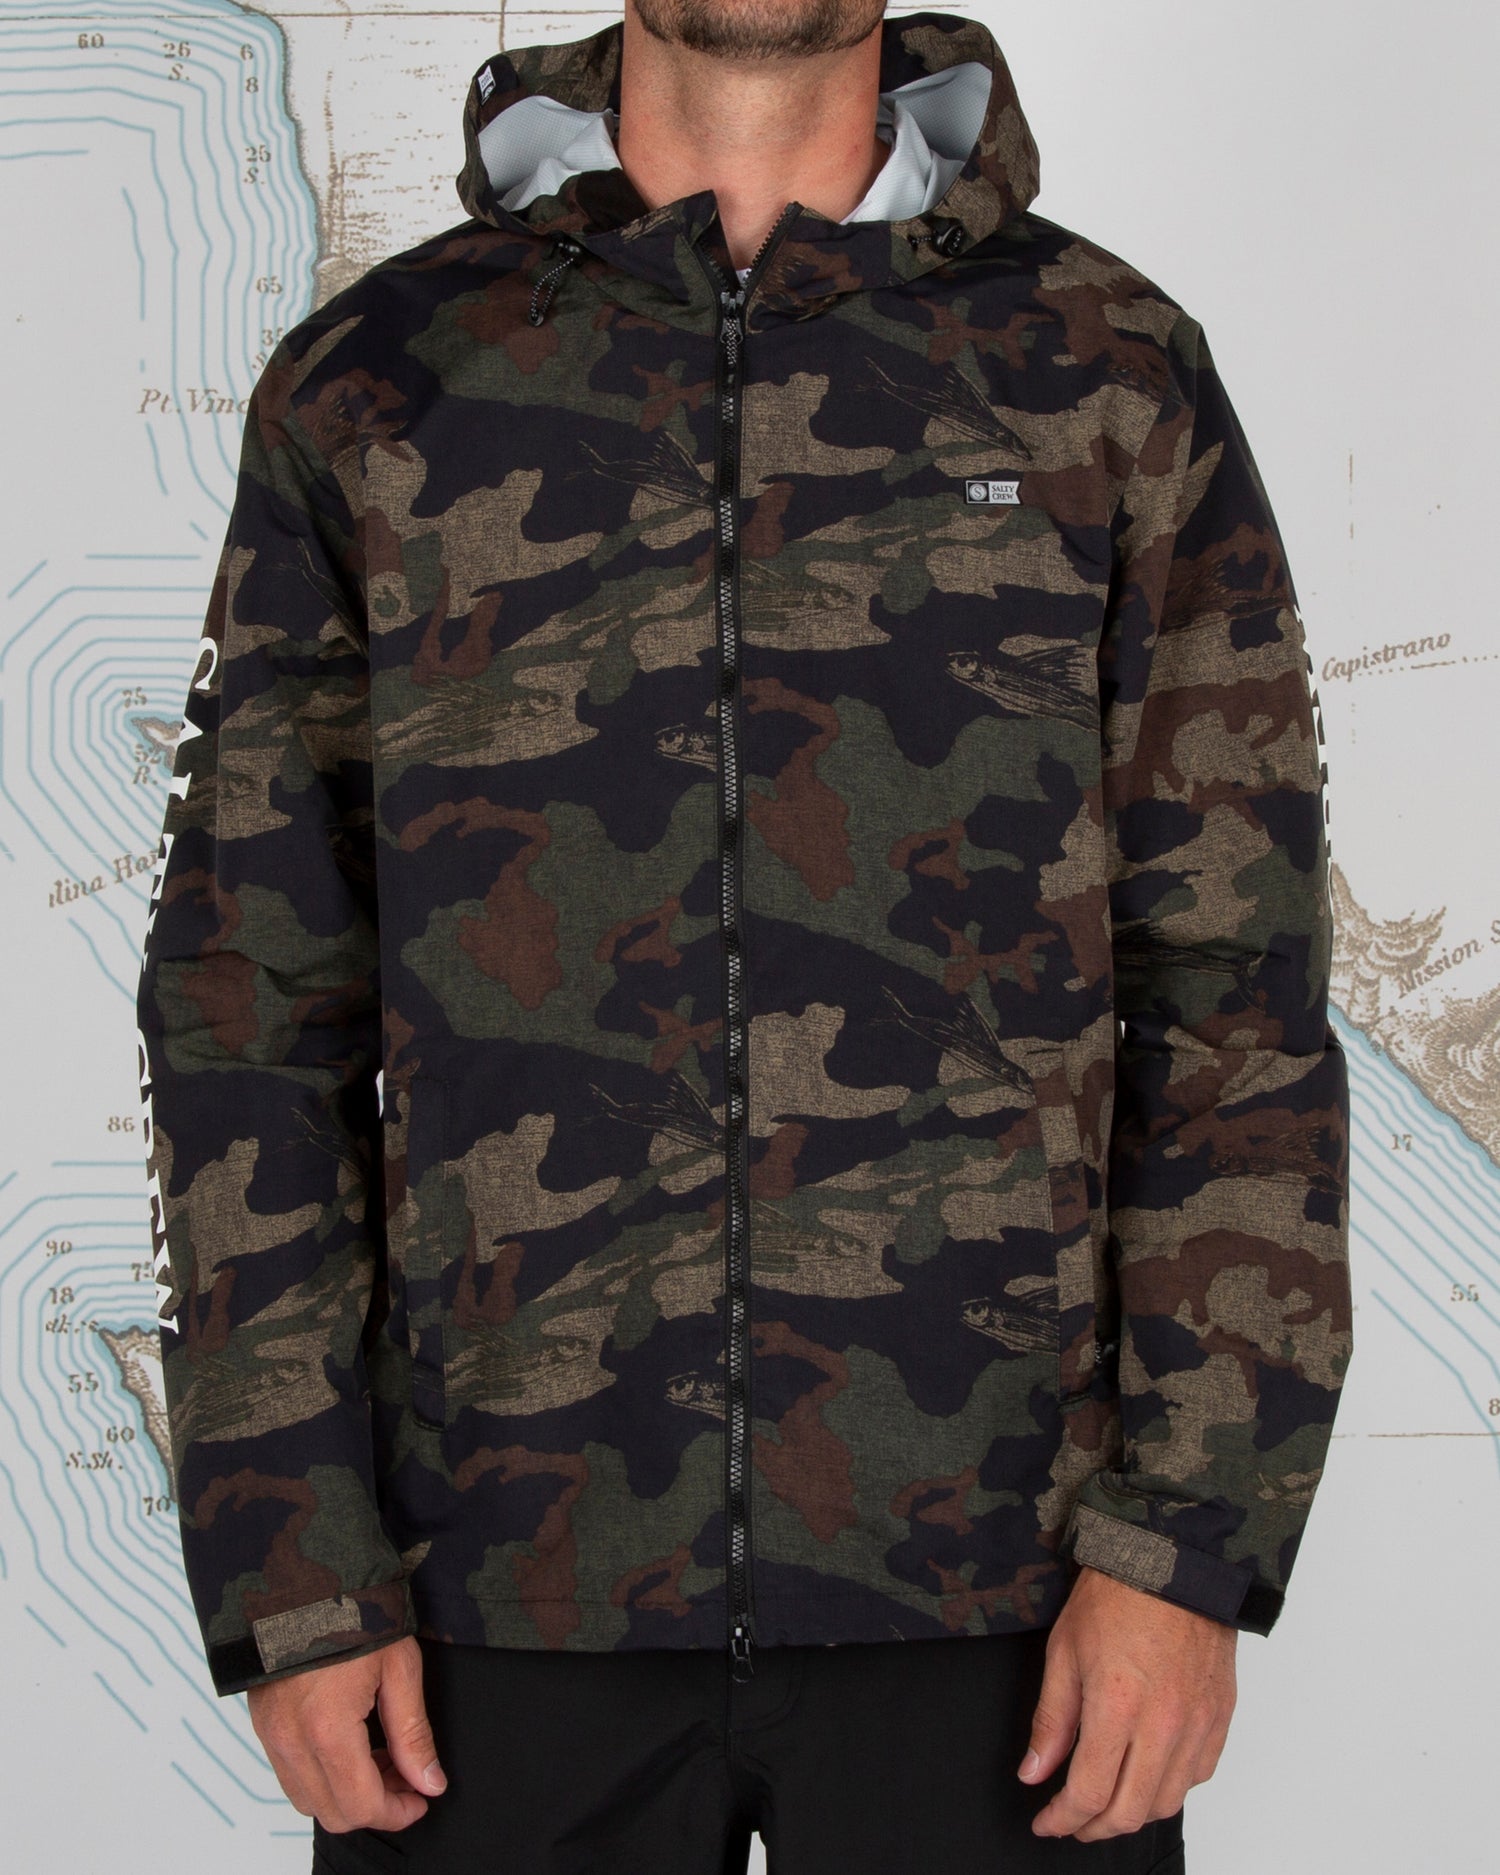 On body front of Pinnacle Camo Jacket